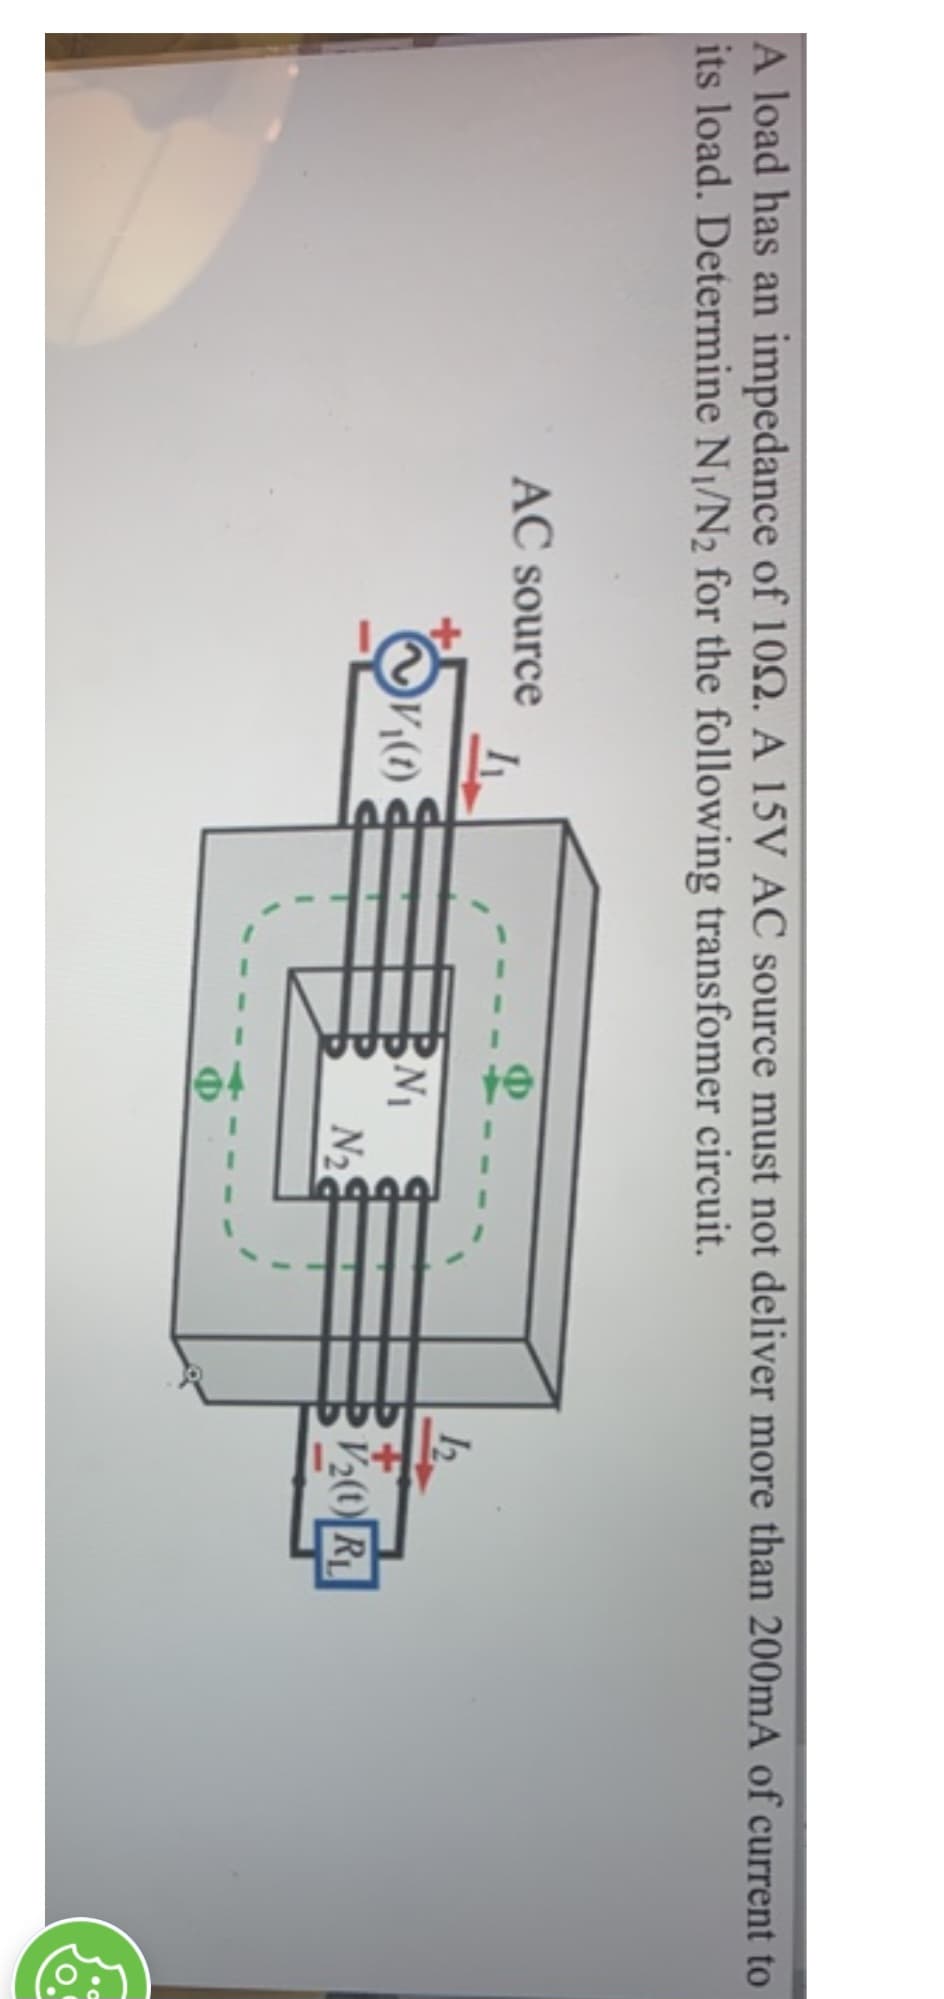 A load has an impedance of 109. A 15V AC source must not deliver more than 200mA of current to
its load. Determine N₁/N2 for the following transfomer circuit.
AC source
I
V₁(1)
N₁
N₂
12.
V₂(1) RL
8.